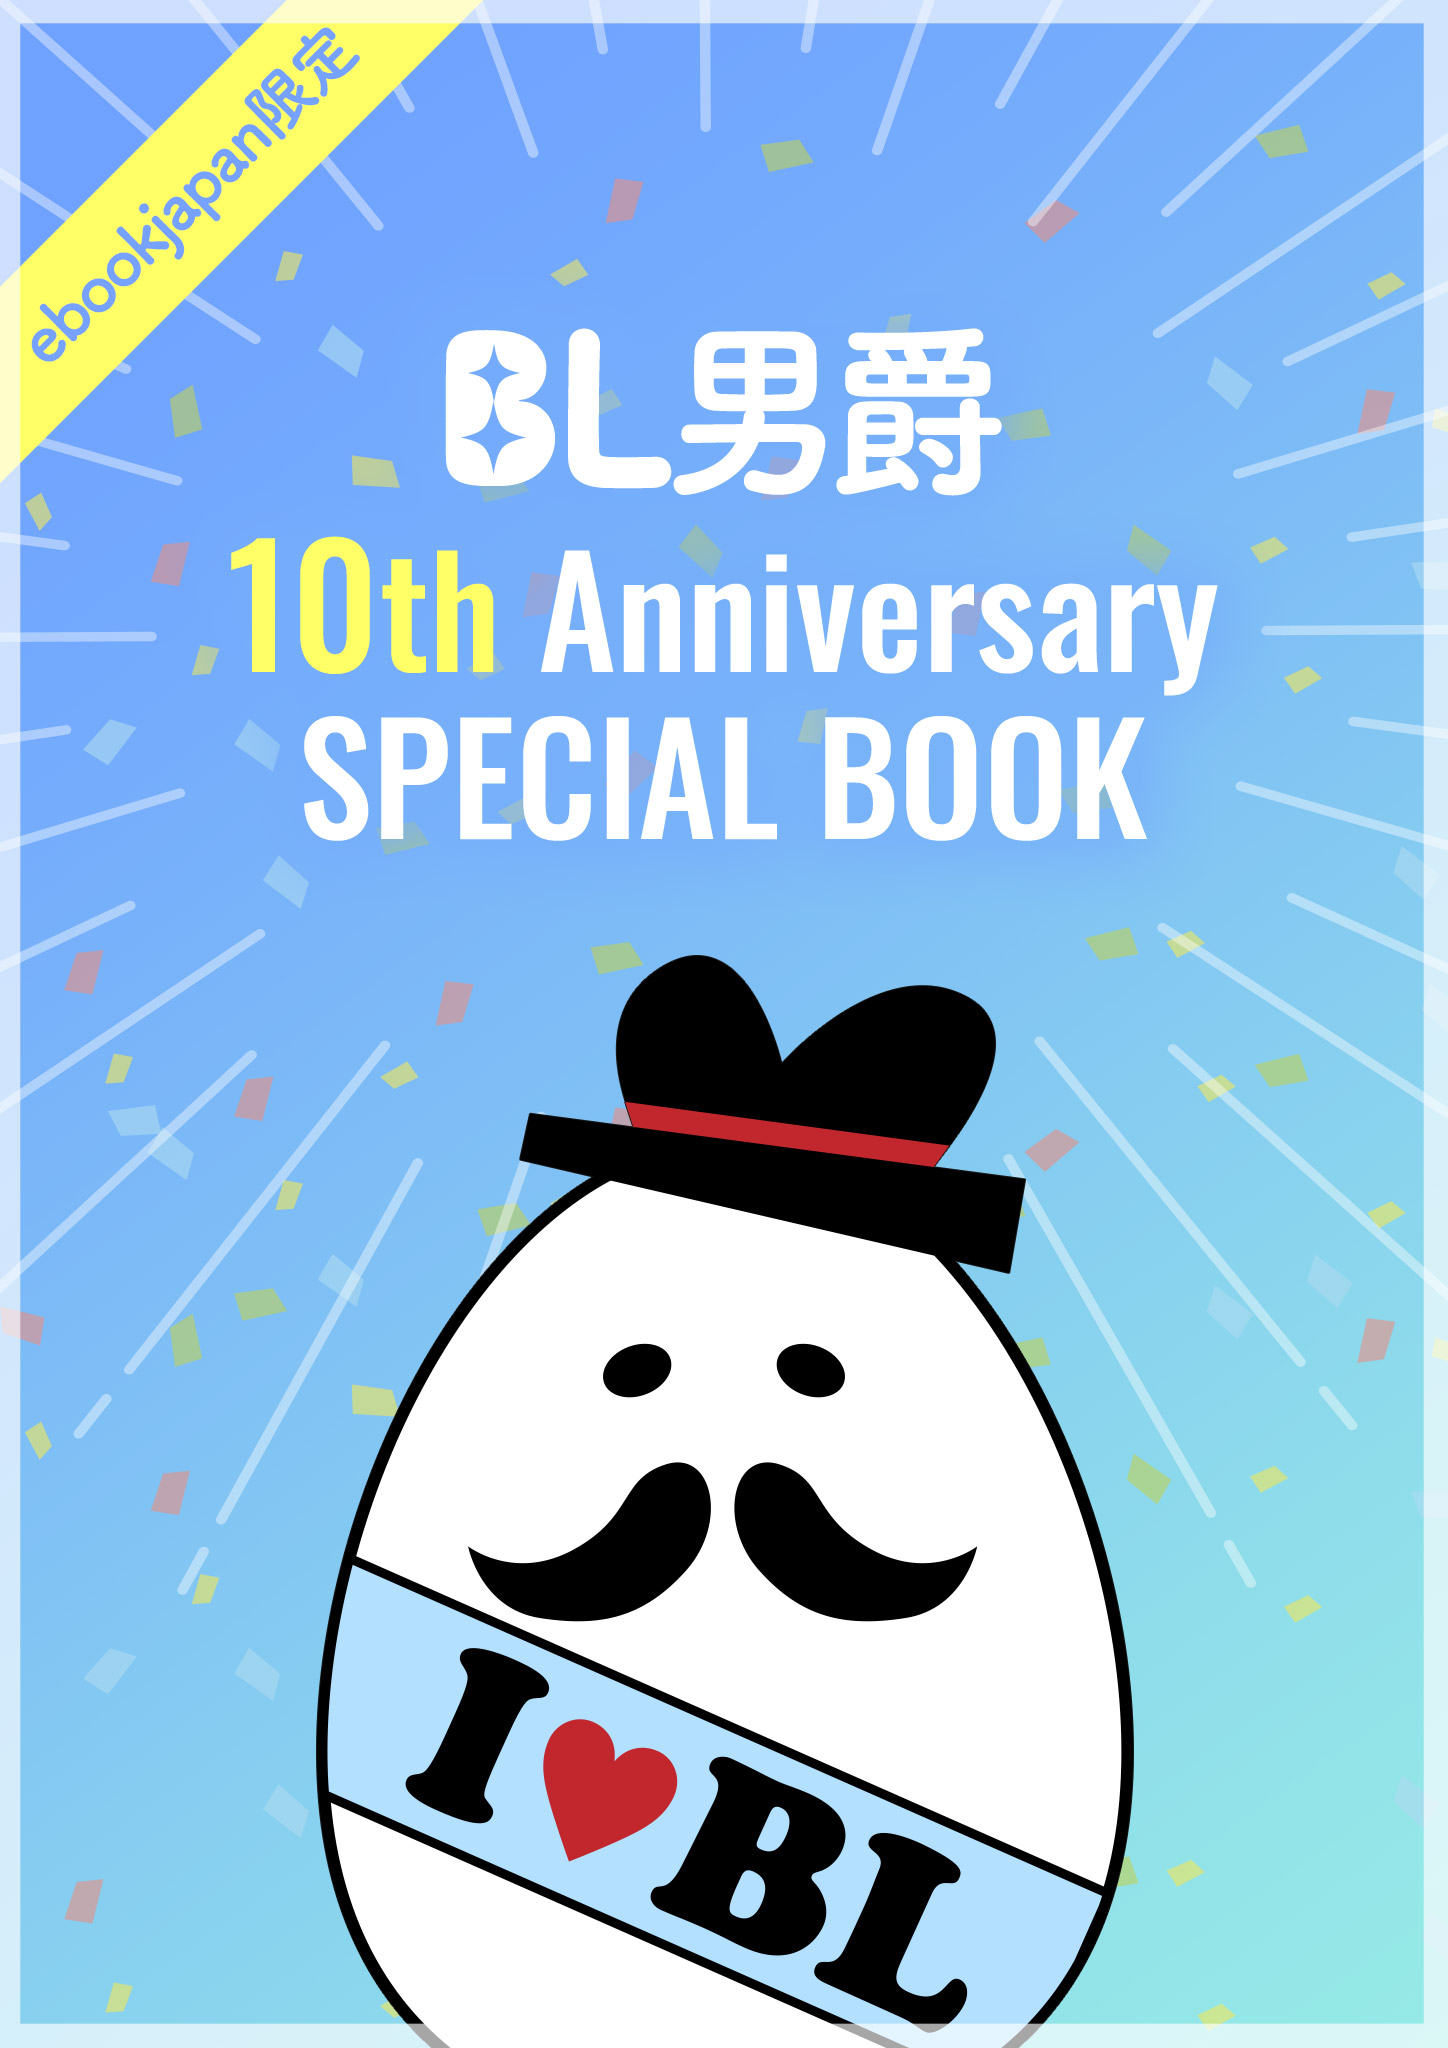 BL男爵 10th Anniversary SPECIAL BOOK